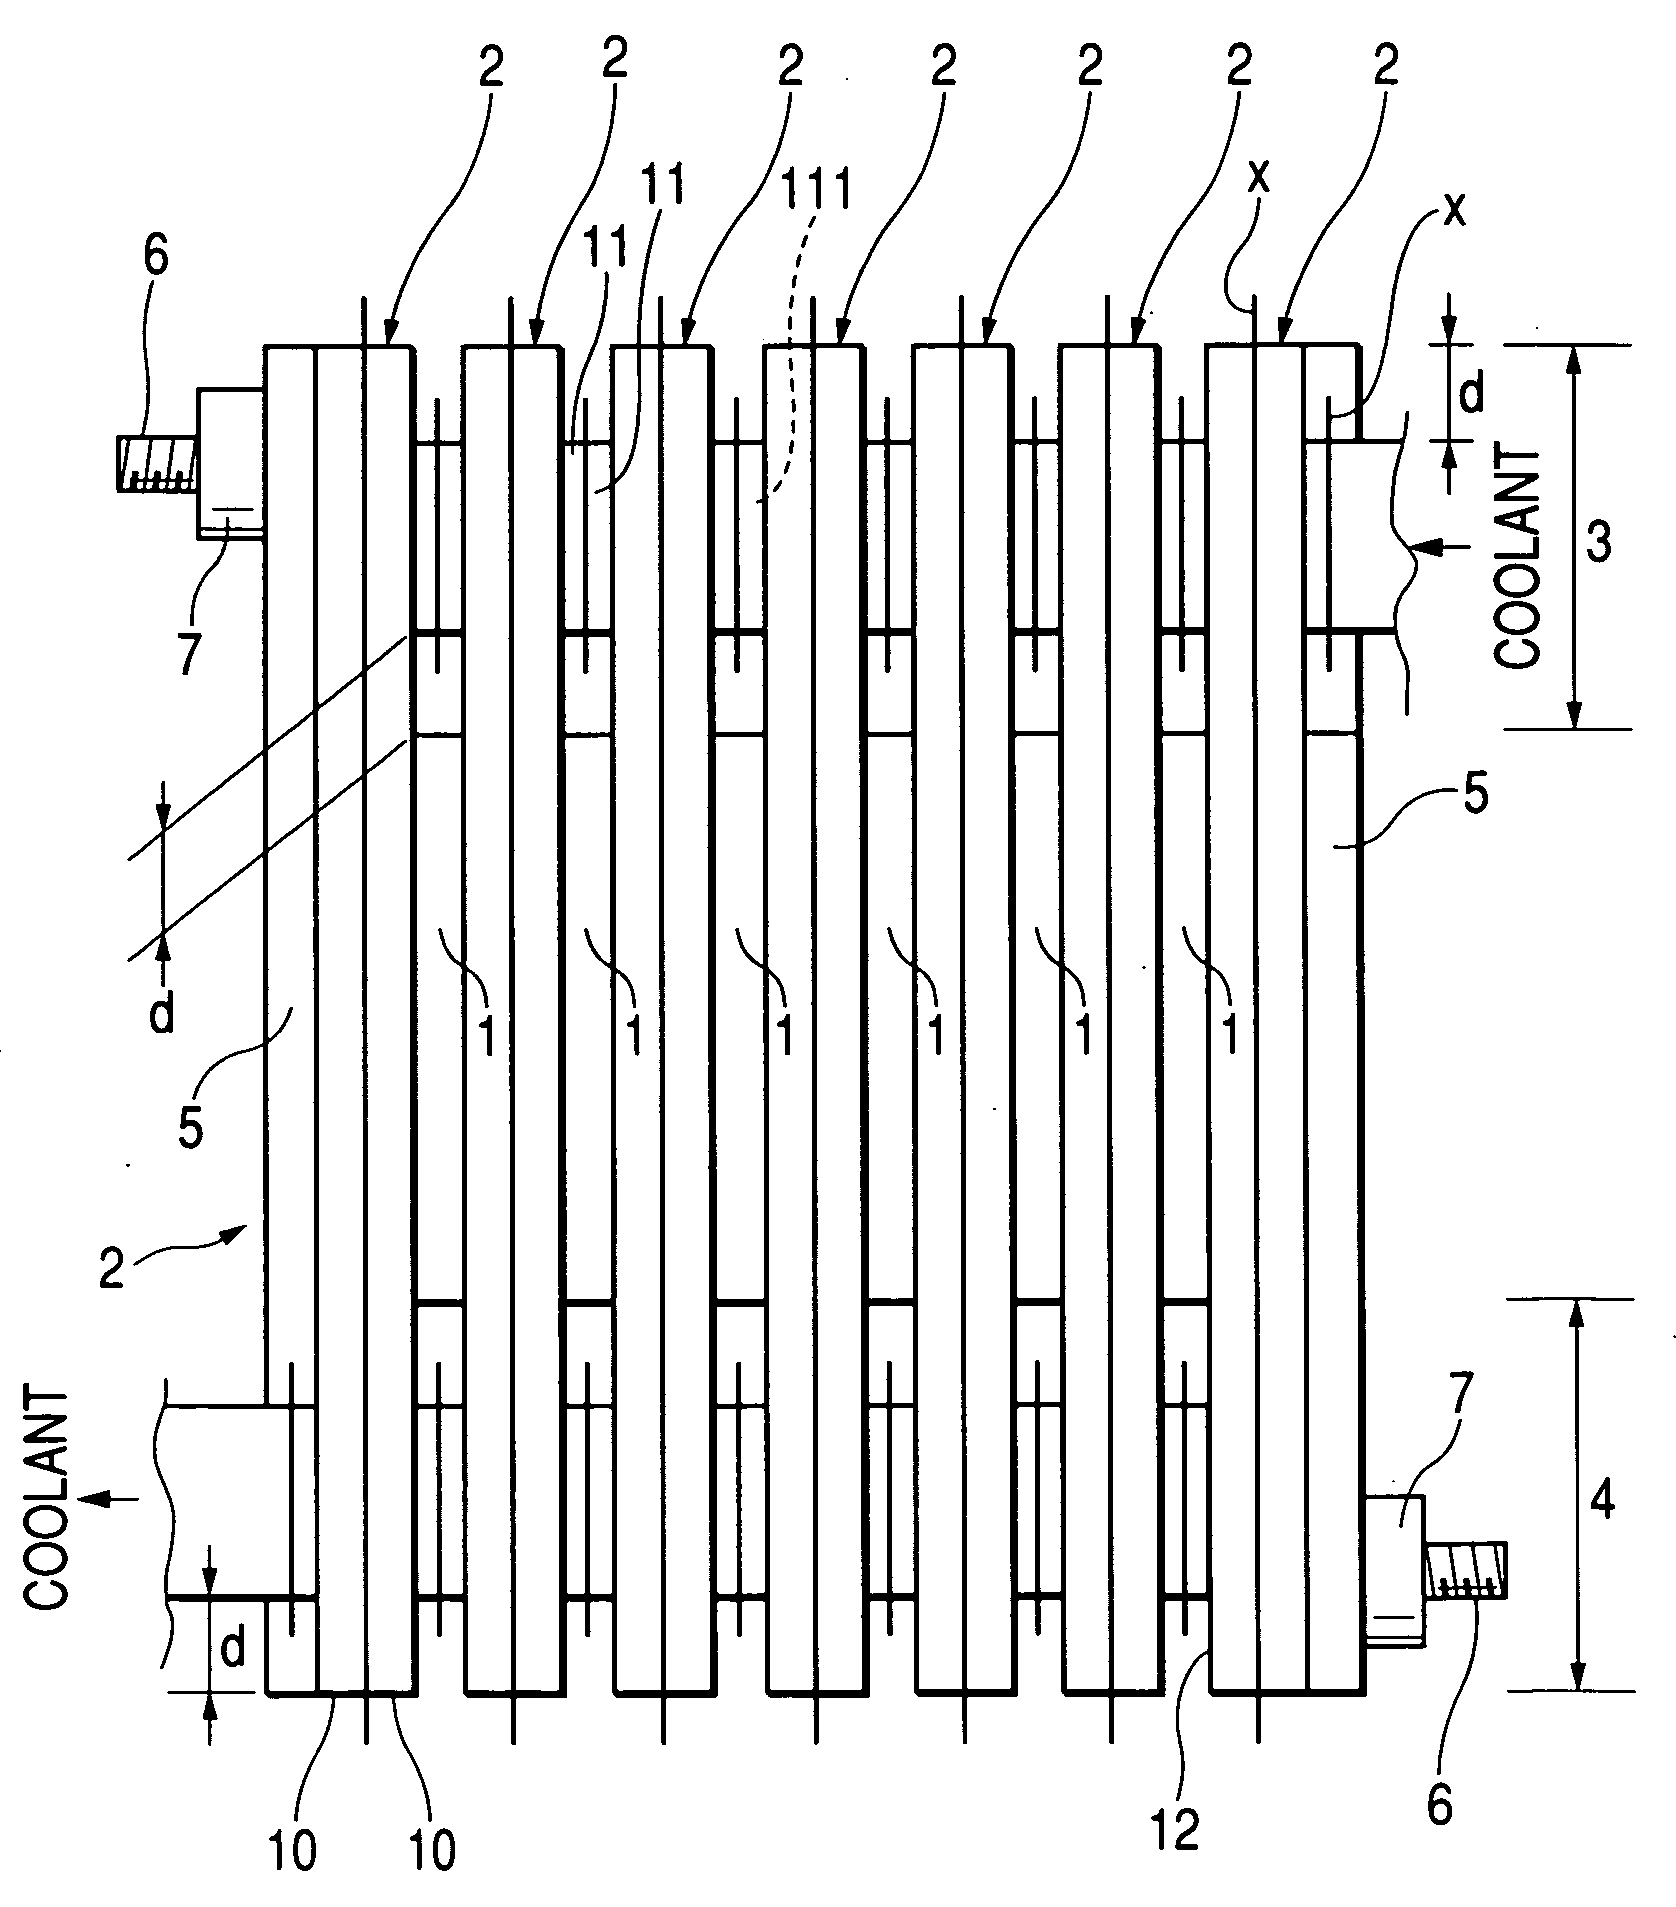 Cooler for cooling both sides of semiconductor device